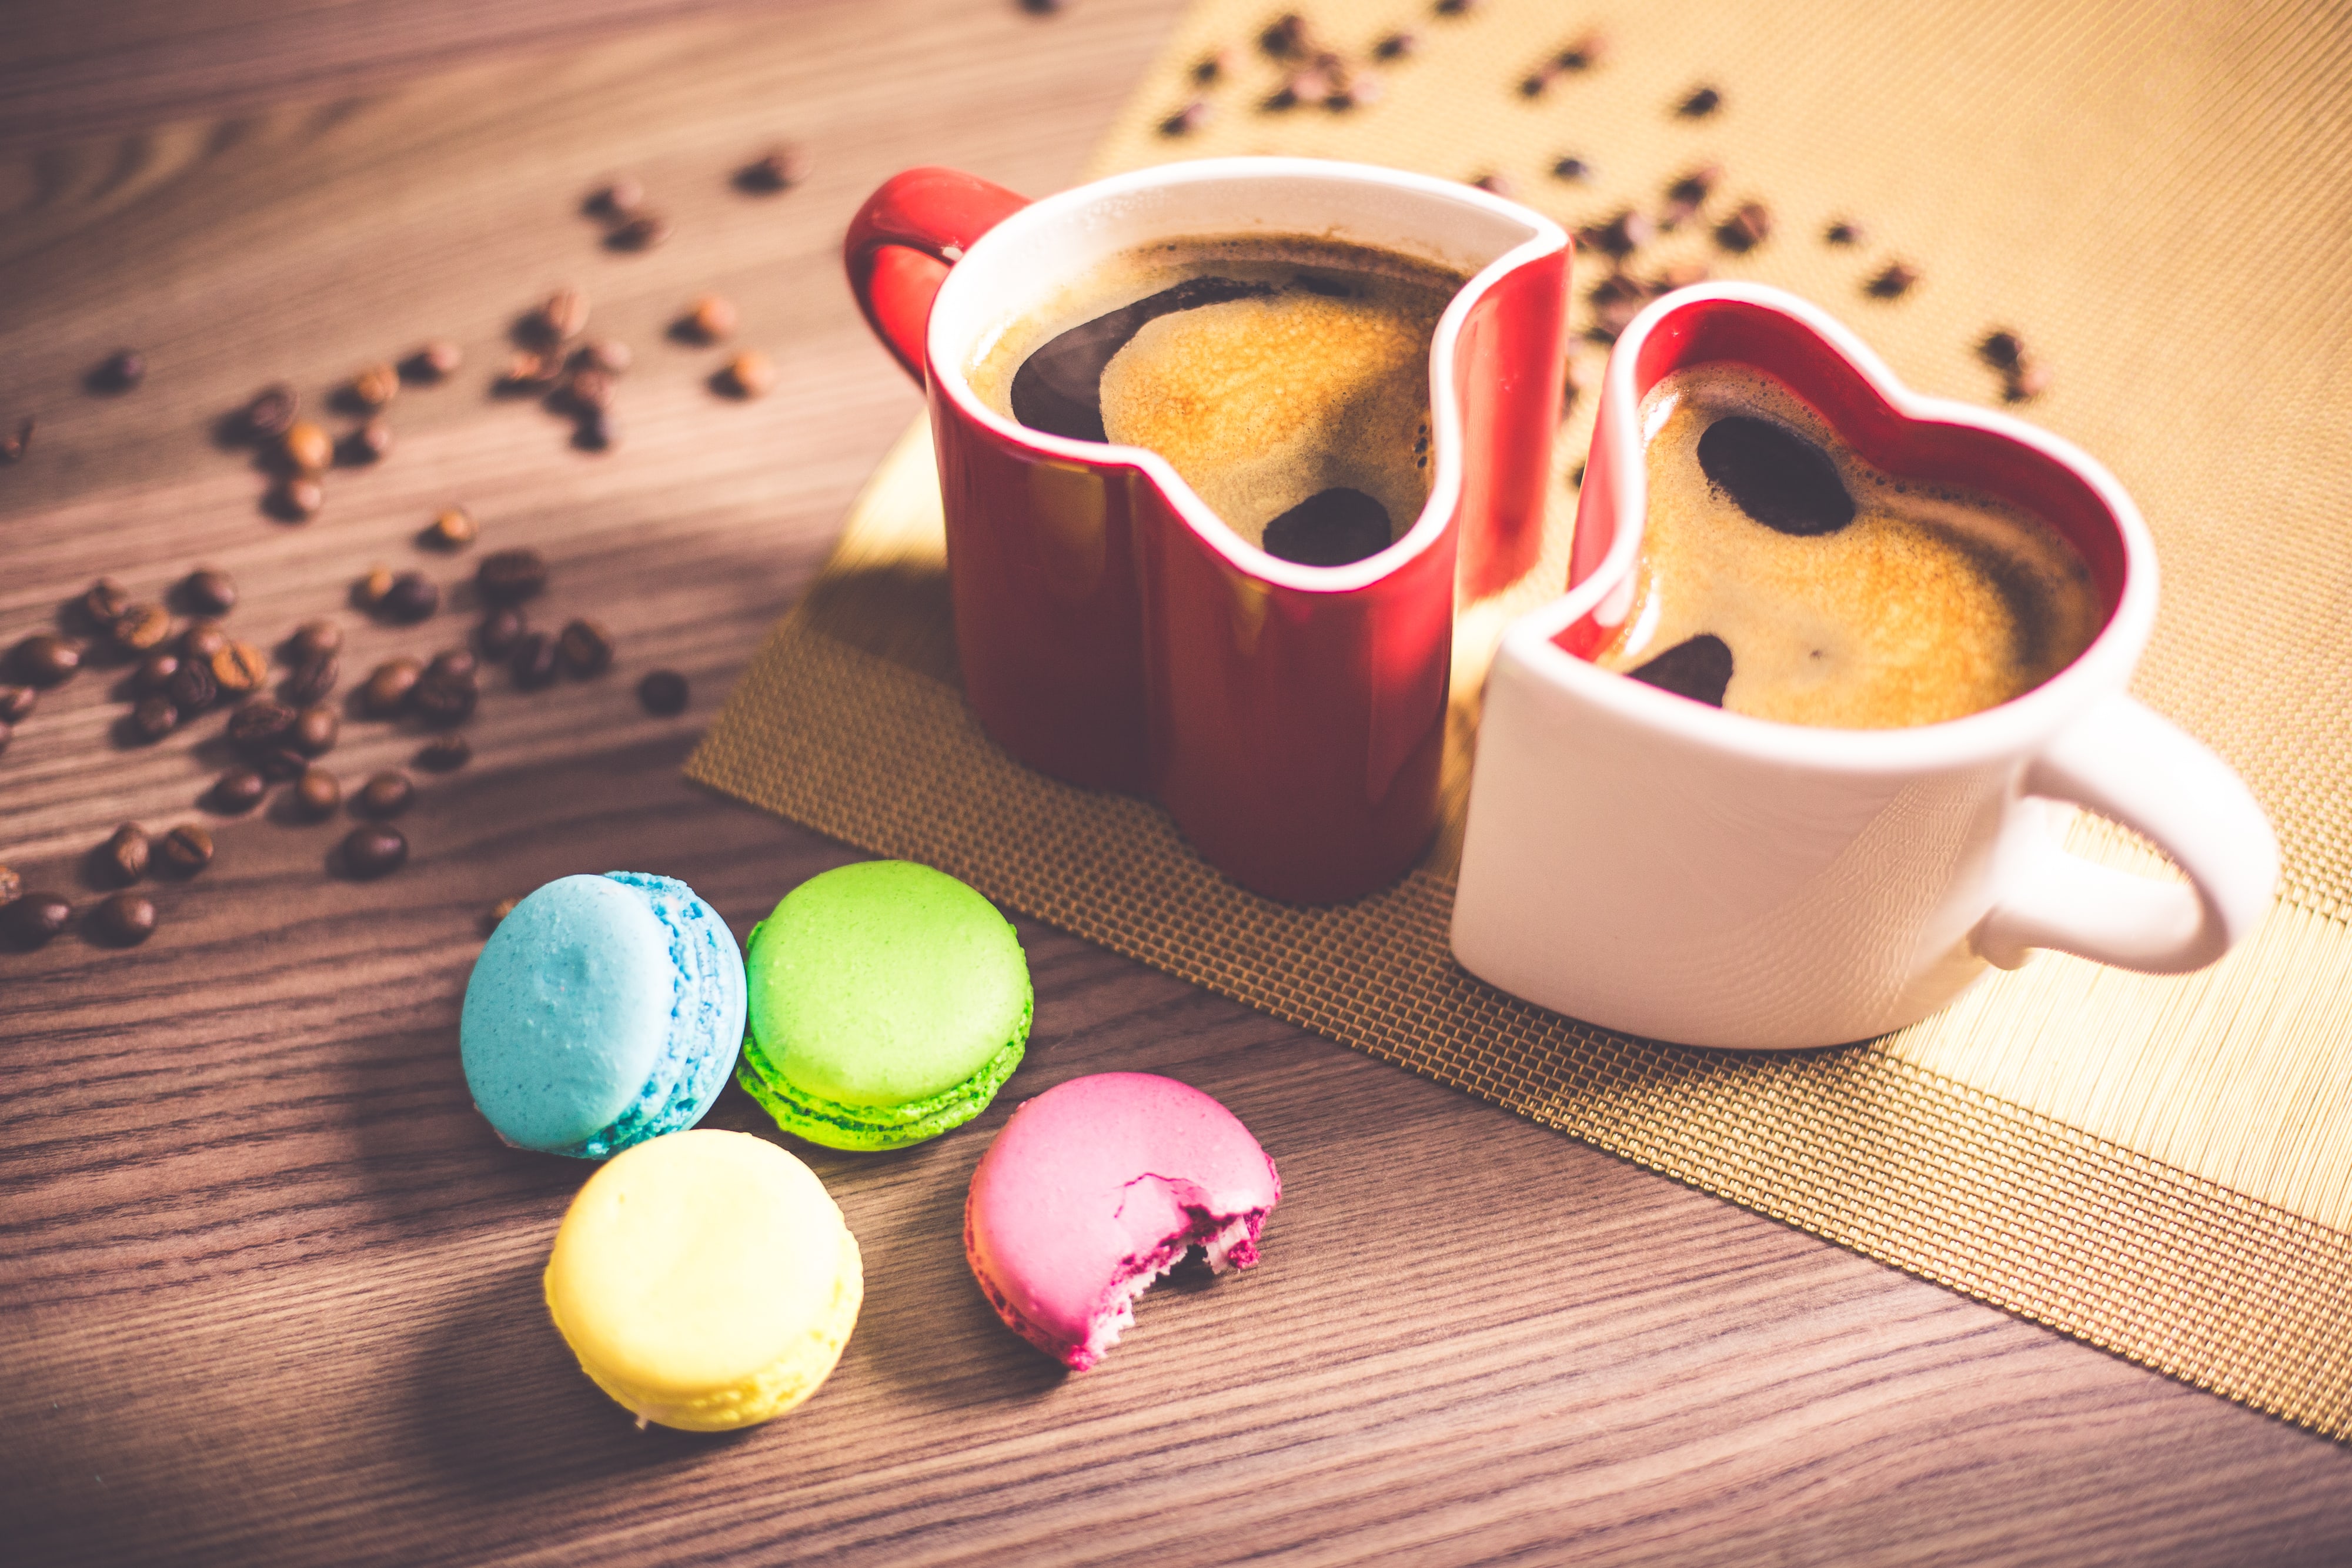 Coffee in heart cups and macarons Wallpaper and Free Stock